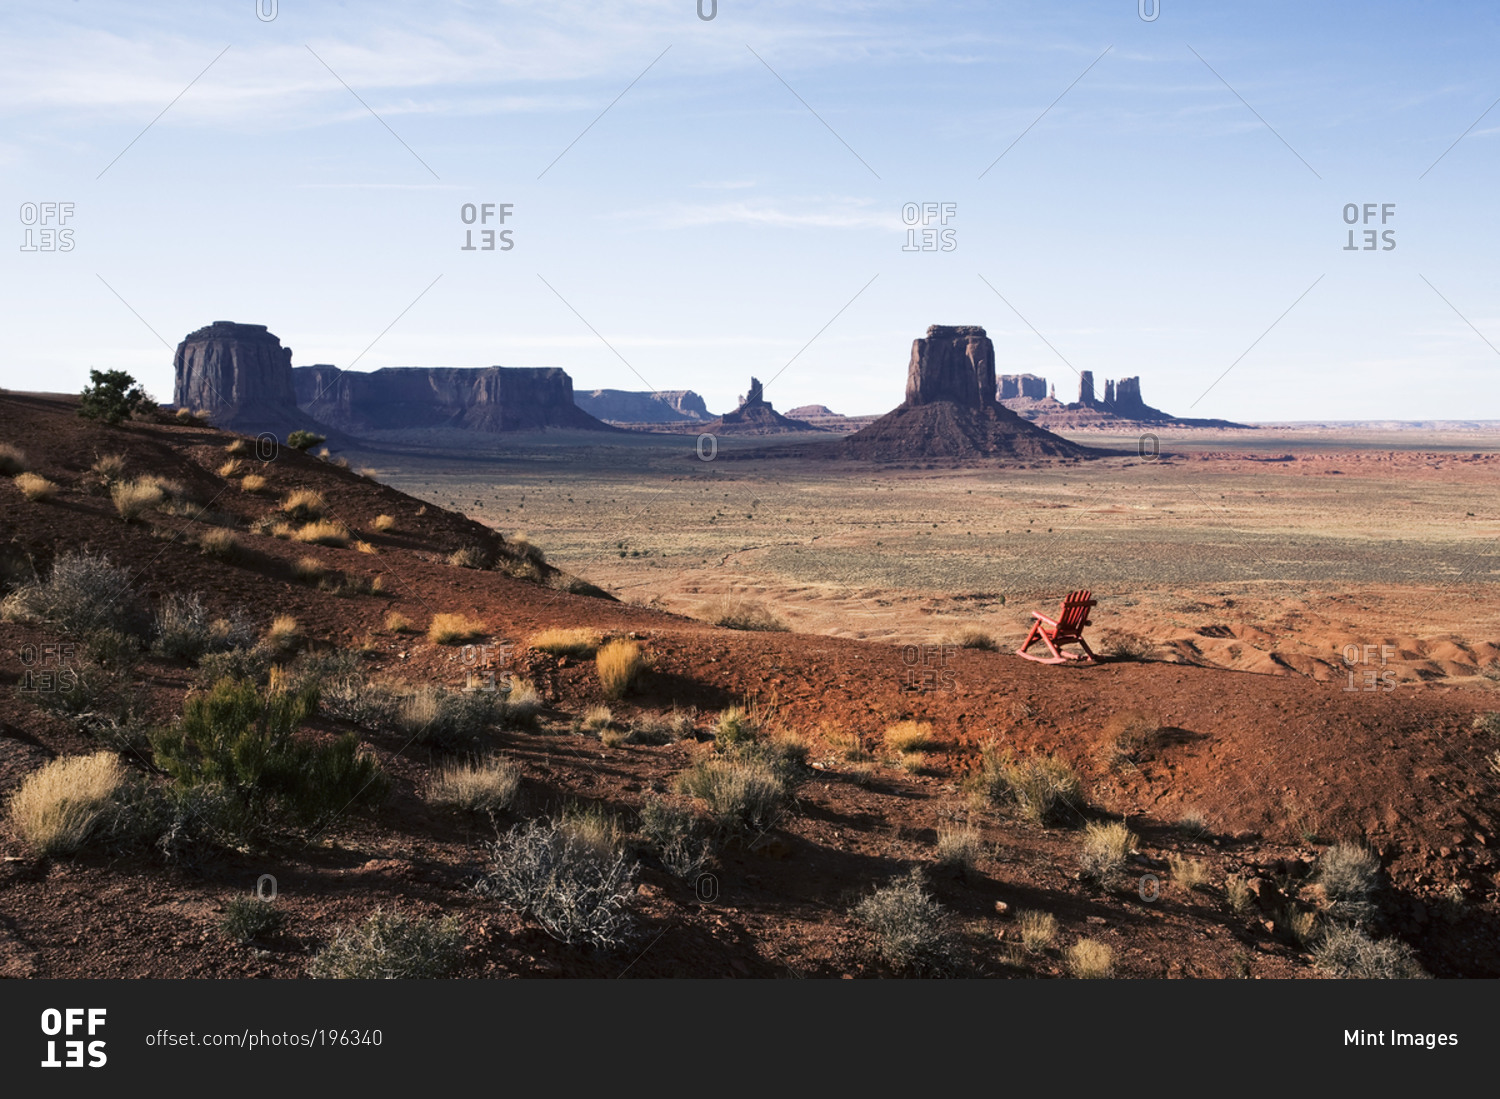 The landscape and eroded sandstone buttes and structure of Monument Valley